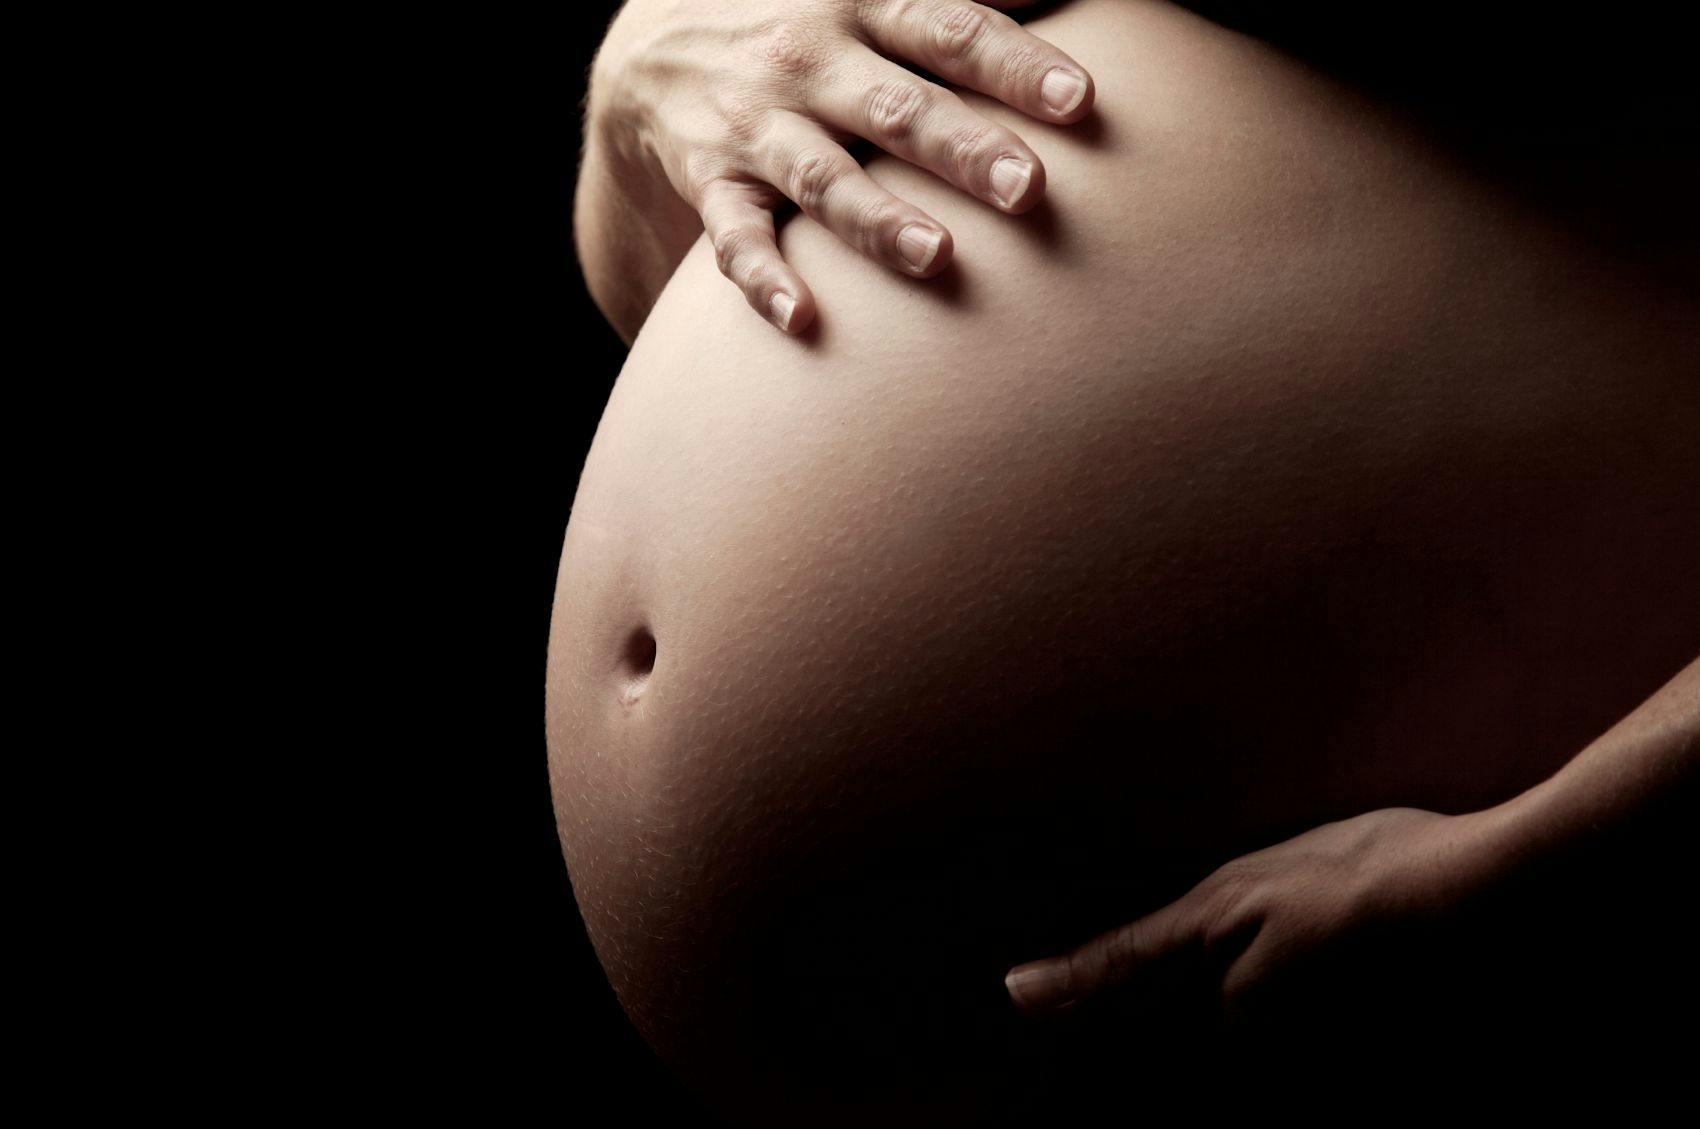 Stock image of a pregnant woman. | Credit: iStock